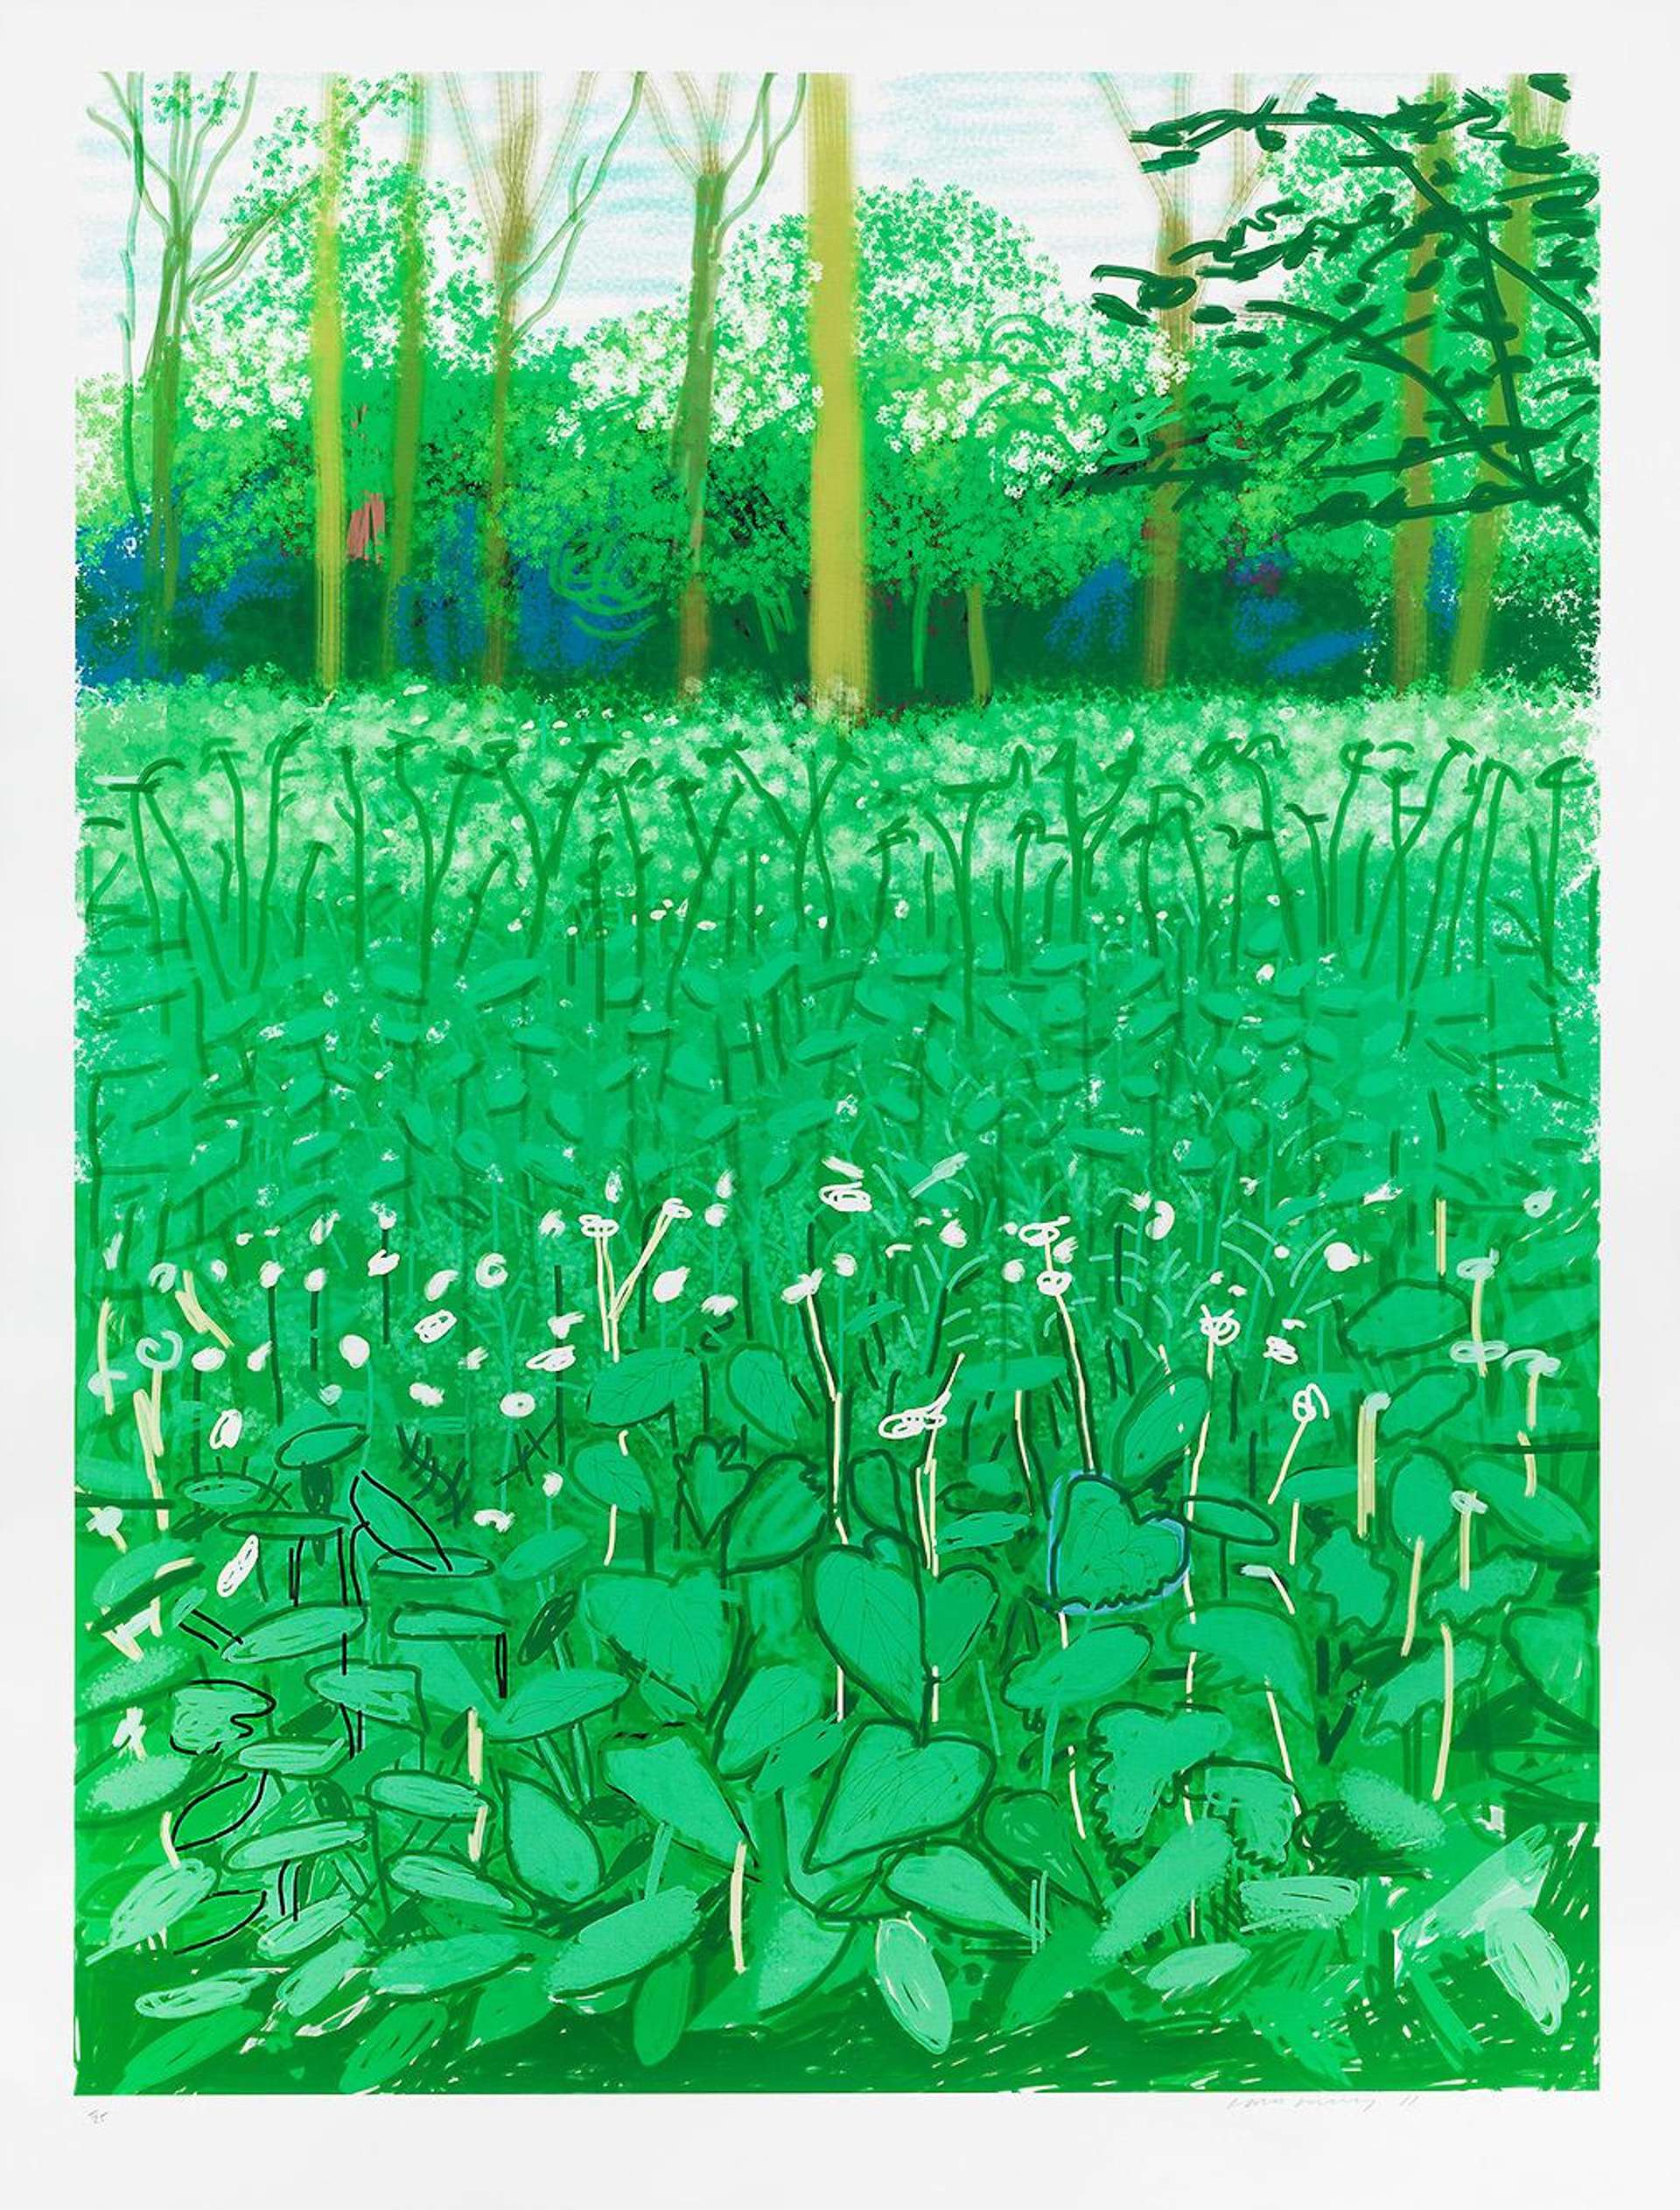 The Arrival Of Spring In Woldgate East Yorkshire 6th May 2011 by David Hockney - 2011